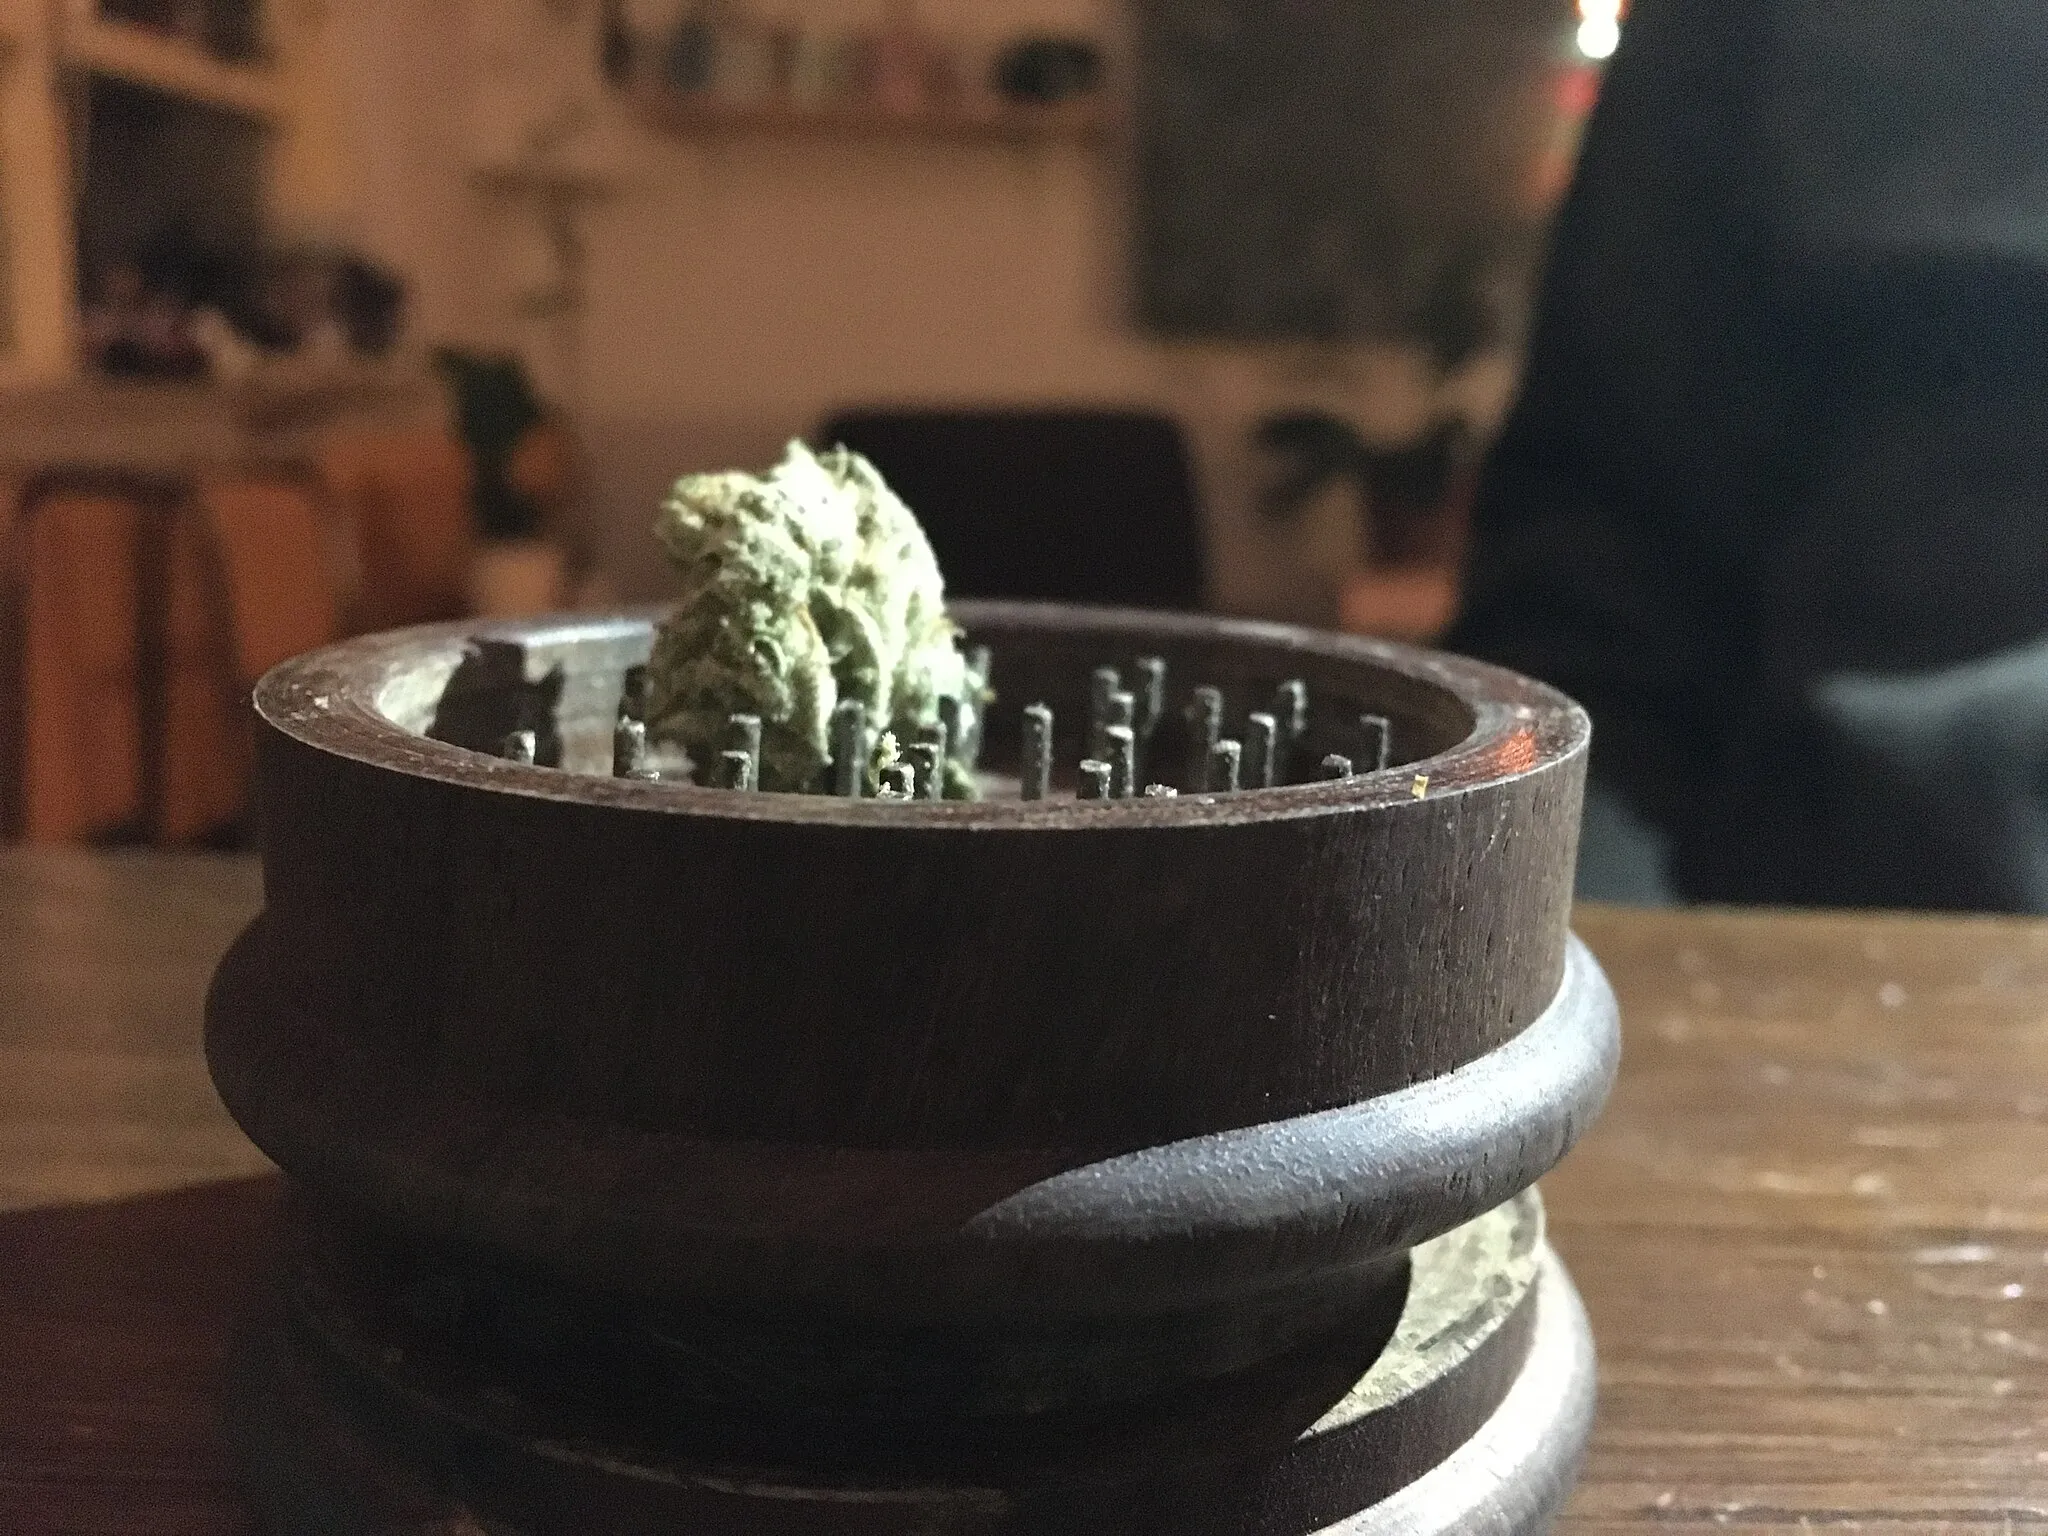 Photo showing: A wooden grinder with 0.4 grams of amnesia haze